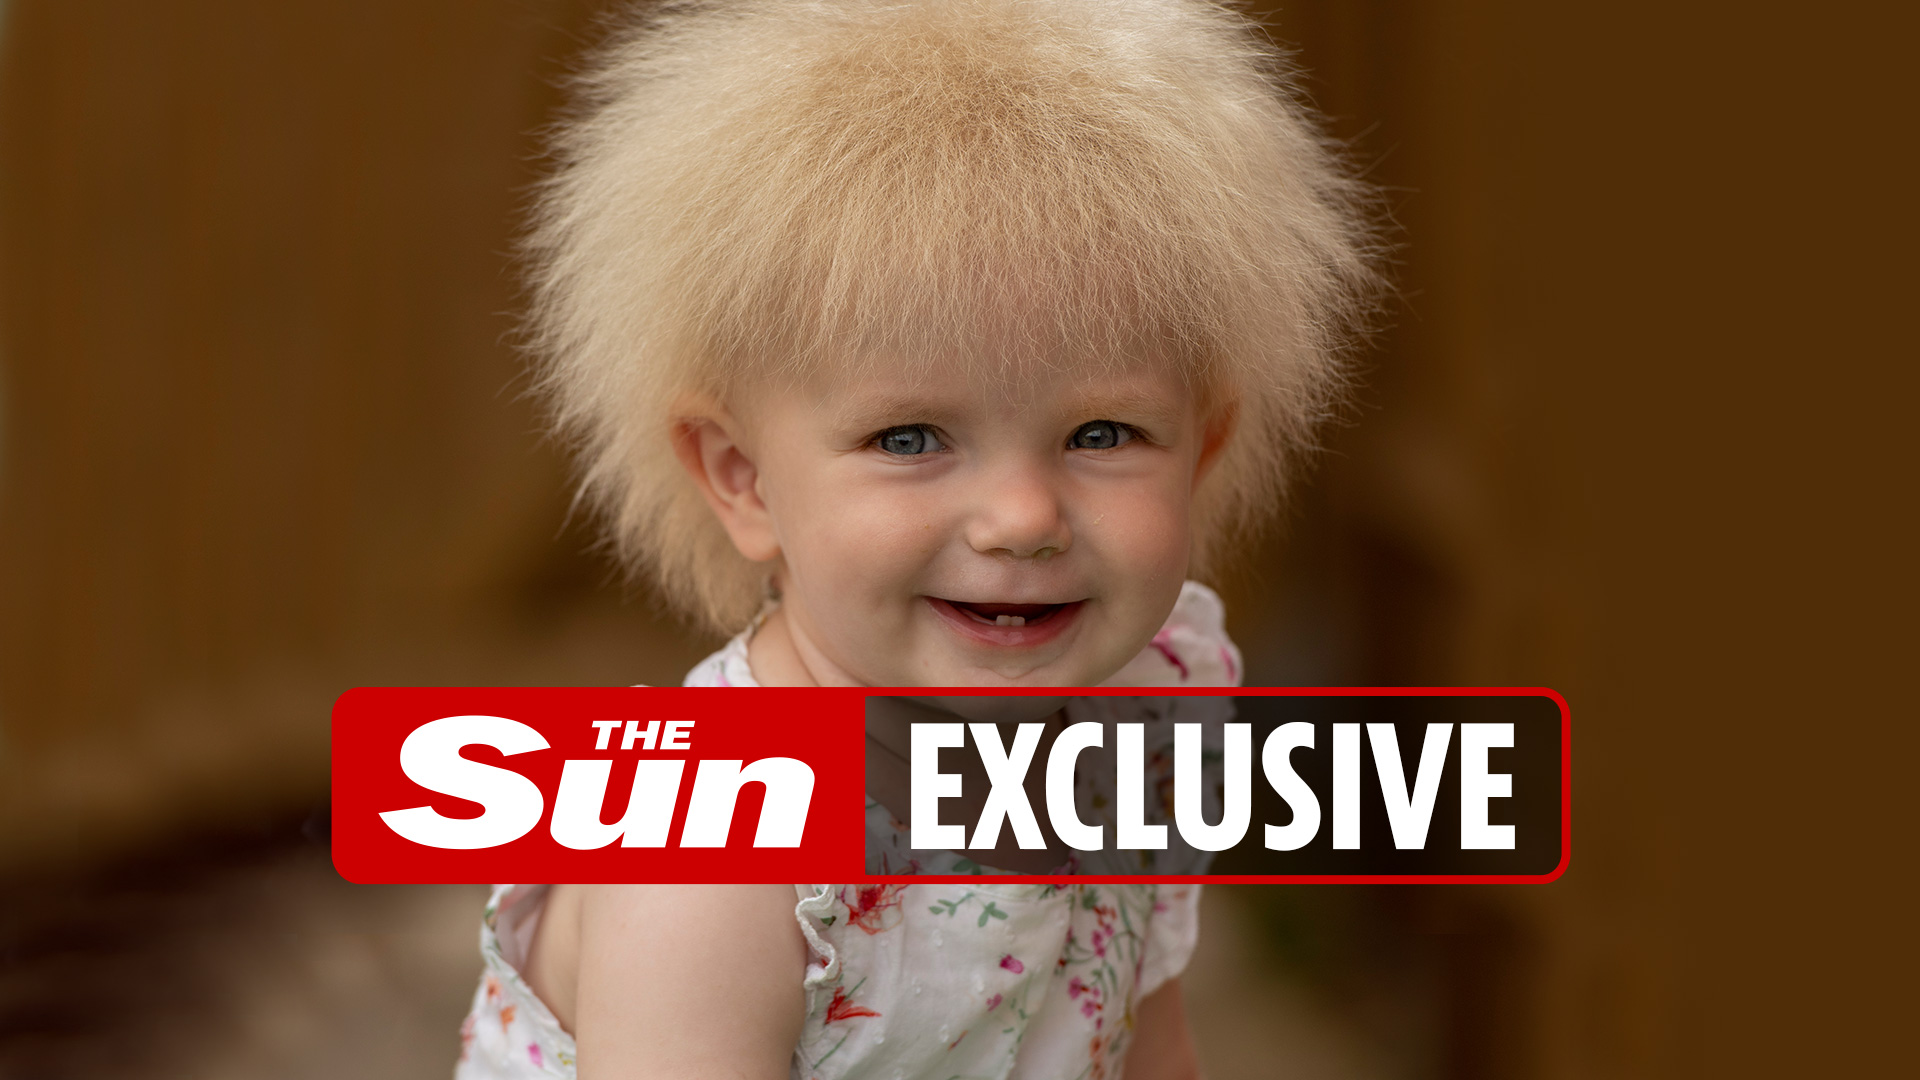 My little girl Boris Johnson looks like Boris Johnson. She has a rare condition that prevents her from having her hair combed.